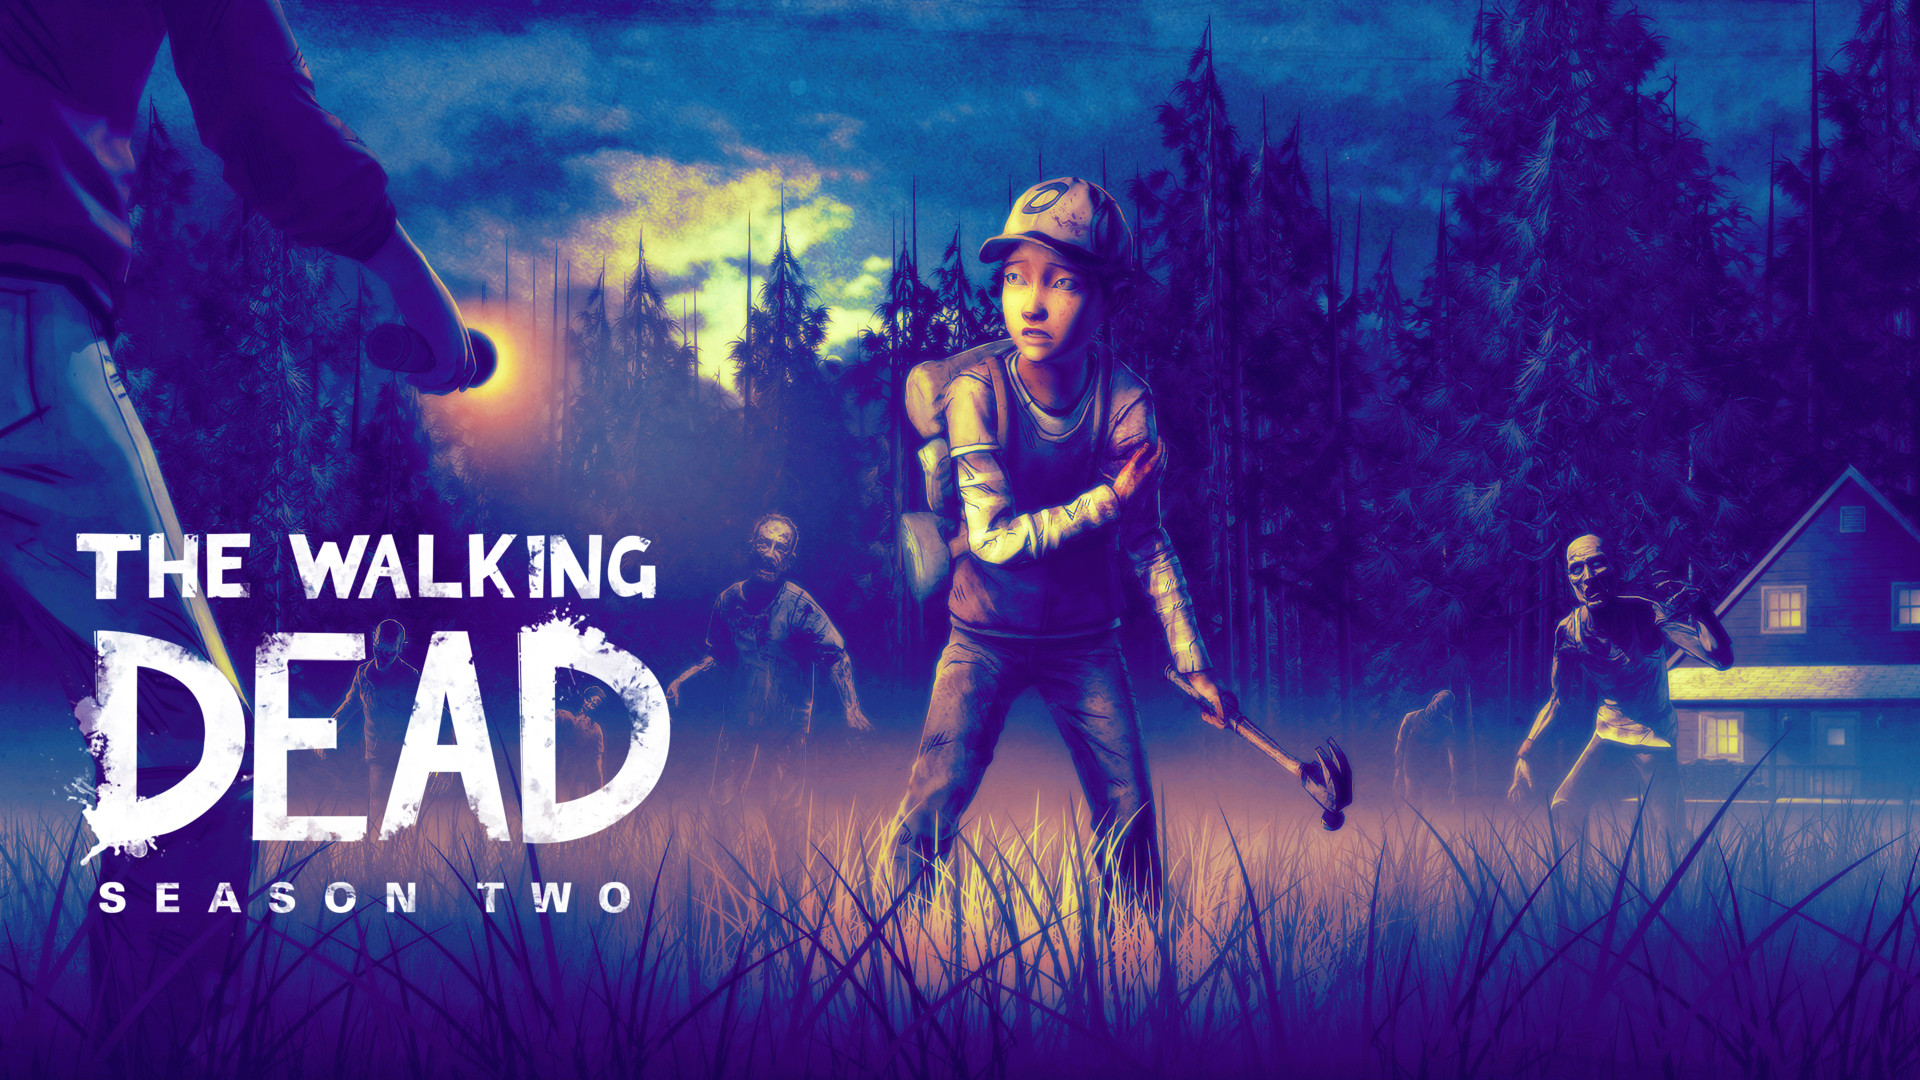 … The Walking Dead Game S2 Wallpaper – Clementine by pikkupenguin